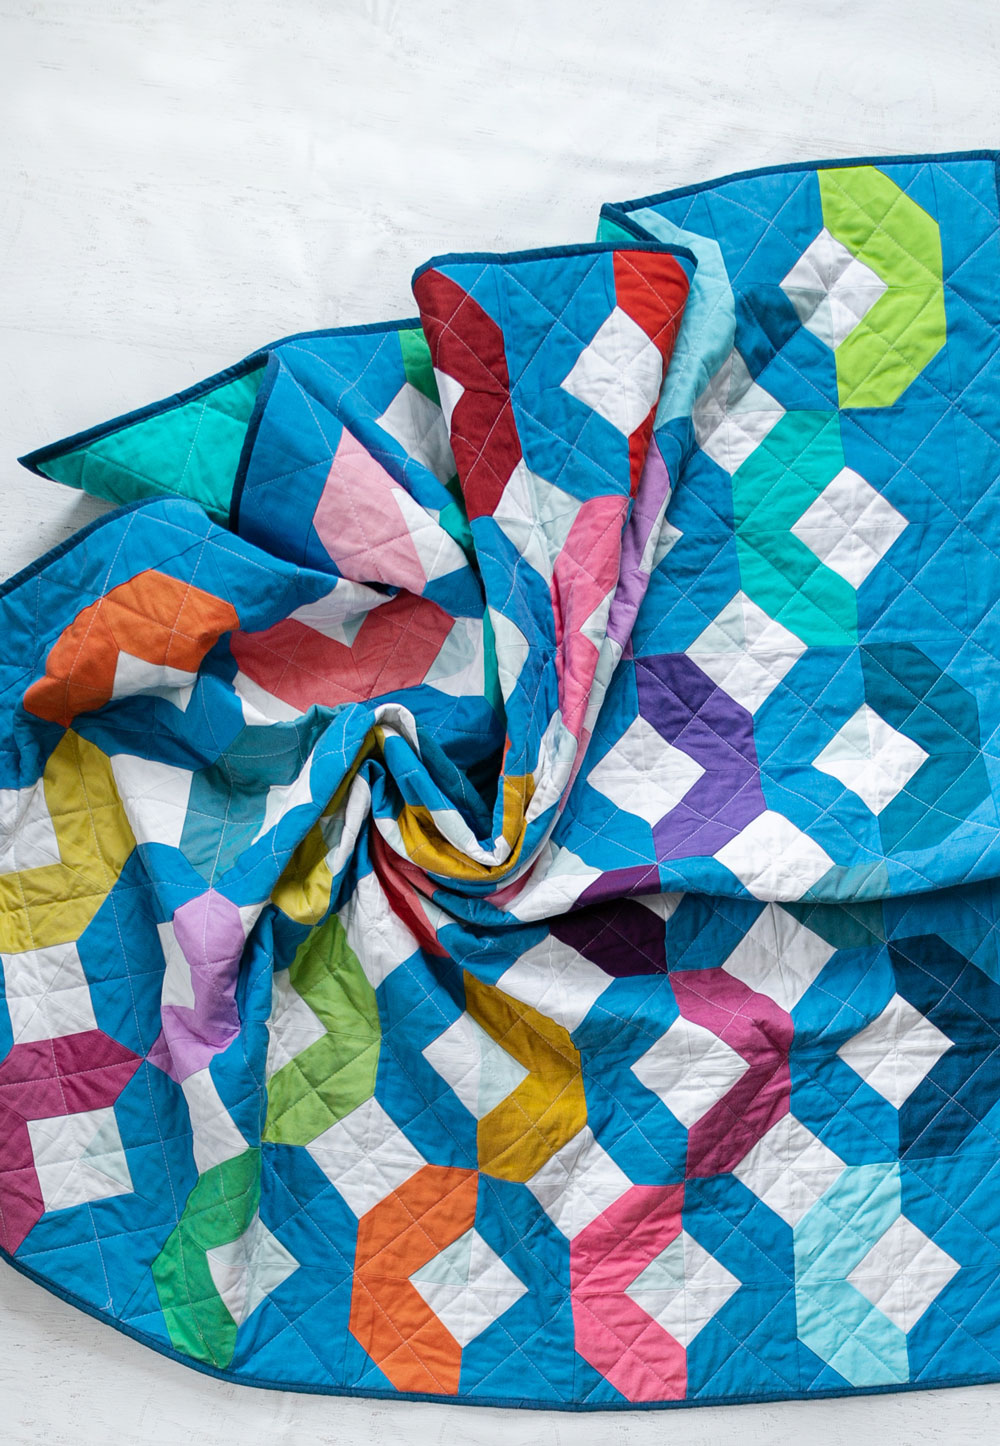 Make a Rainbow Quilt using this simple alteration to the Glitter & Glow quilt pattern. This is fat quarter friendly and great for newbie quilters and beginners. suzyquilts.com #rainbowquilt #rainbowbabyquilt